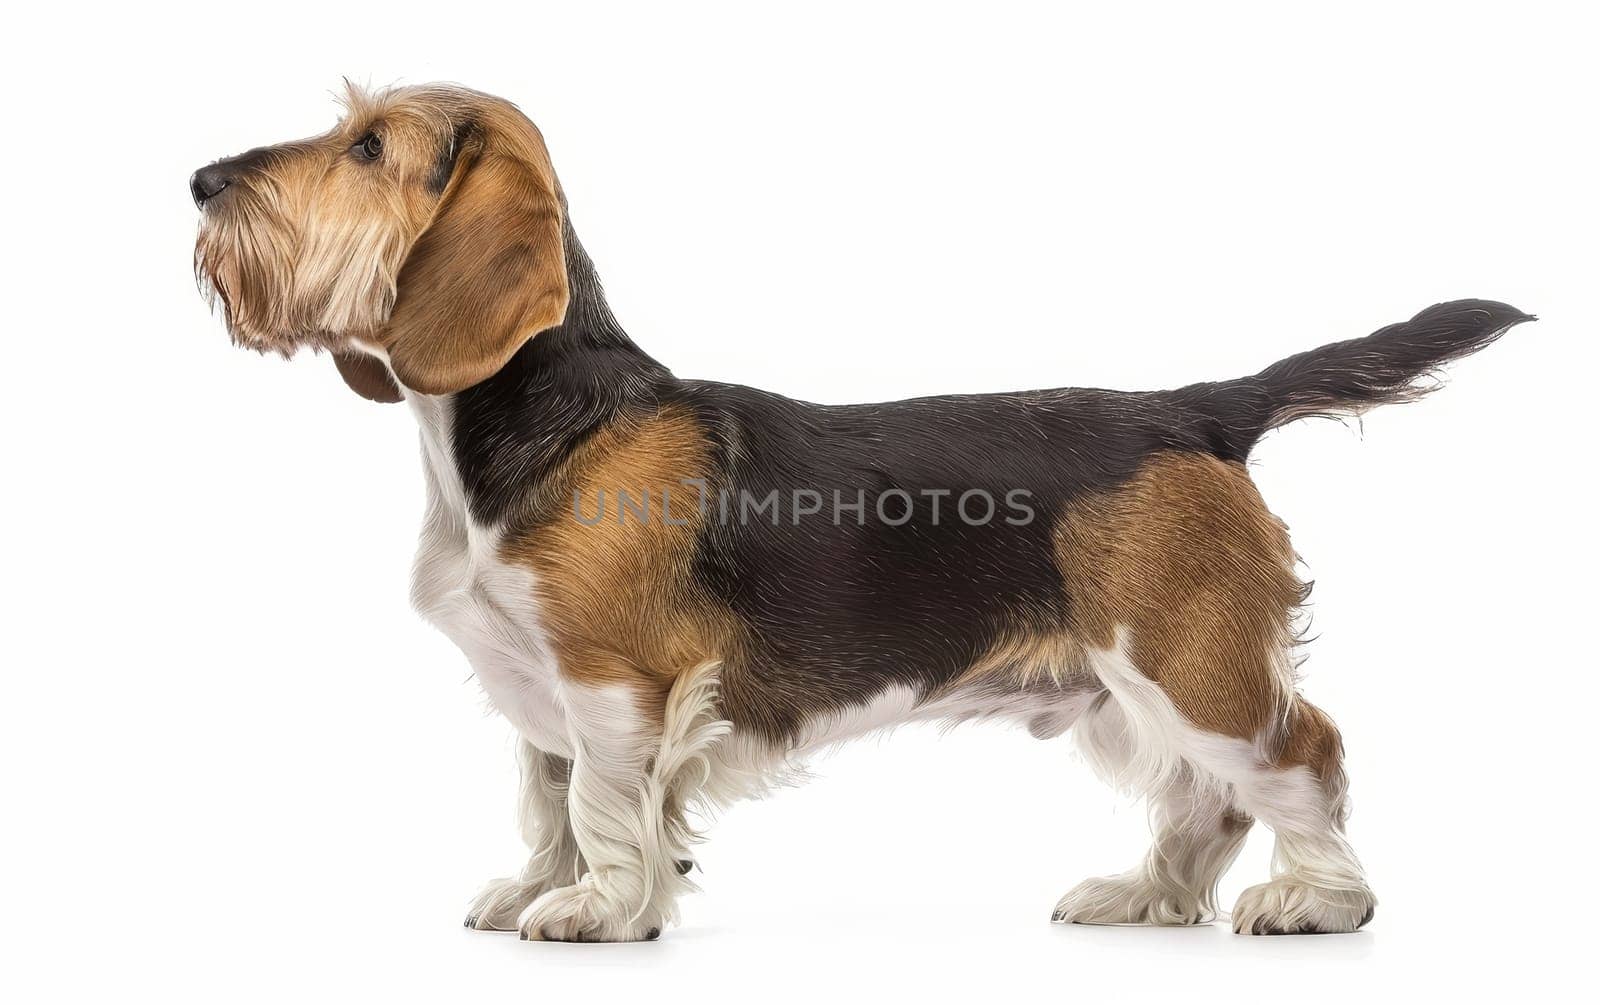 The tricolor Basset Griffon Vendeen displays its unique coat pattern. Its upright posture and attentive look reflect a keen awareness. by sfinks